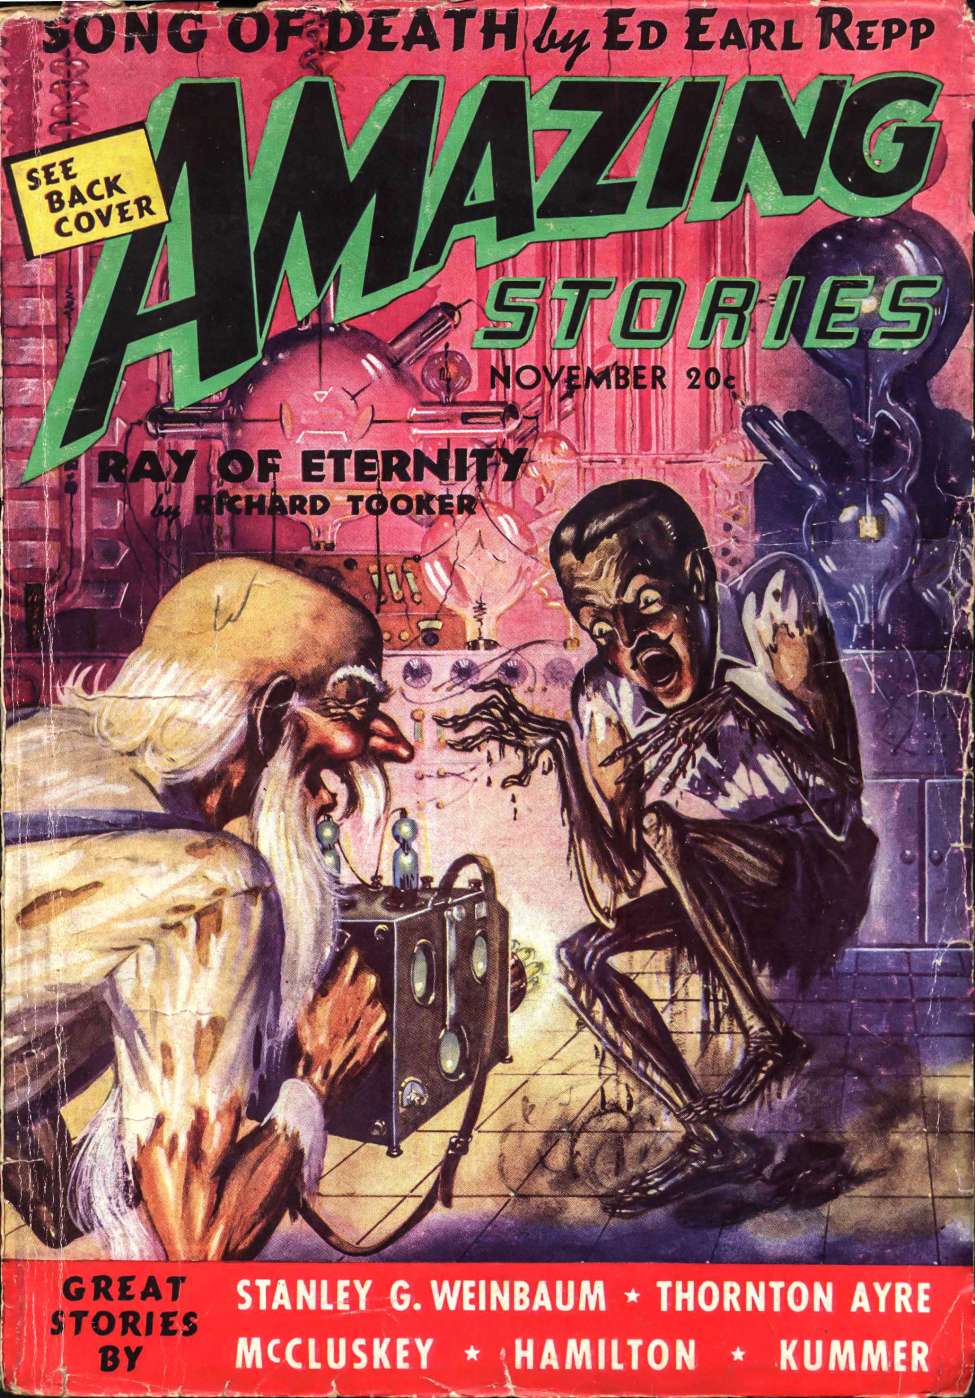 Book Cover For Amazing Stories v12 6 - Ray of Eternity - Richard Tooker